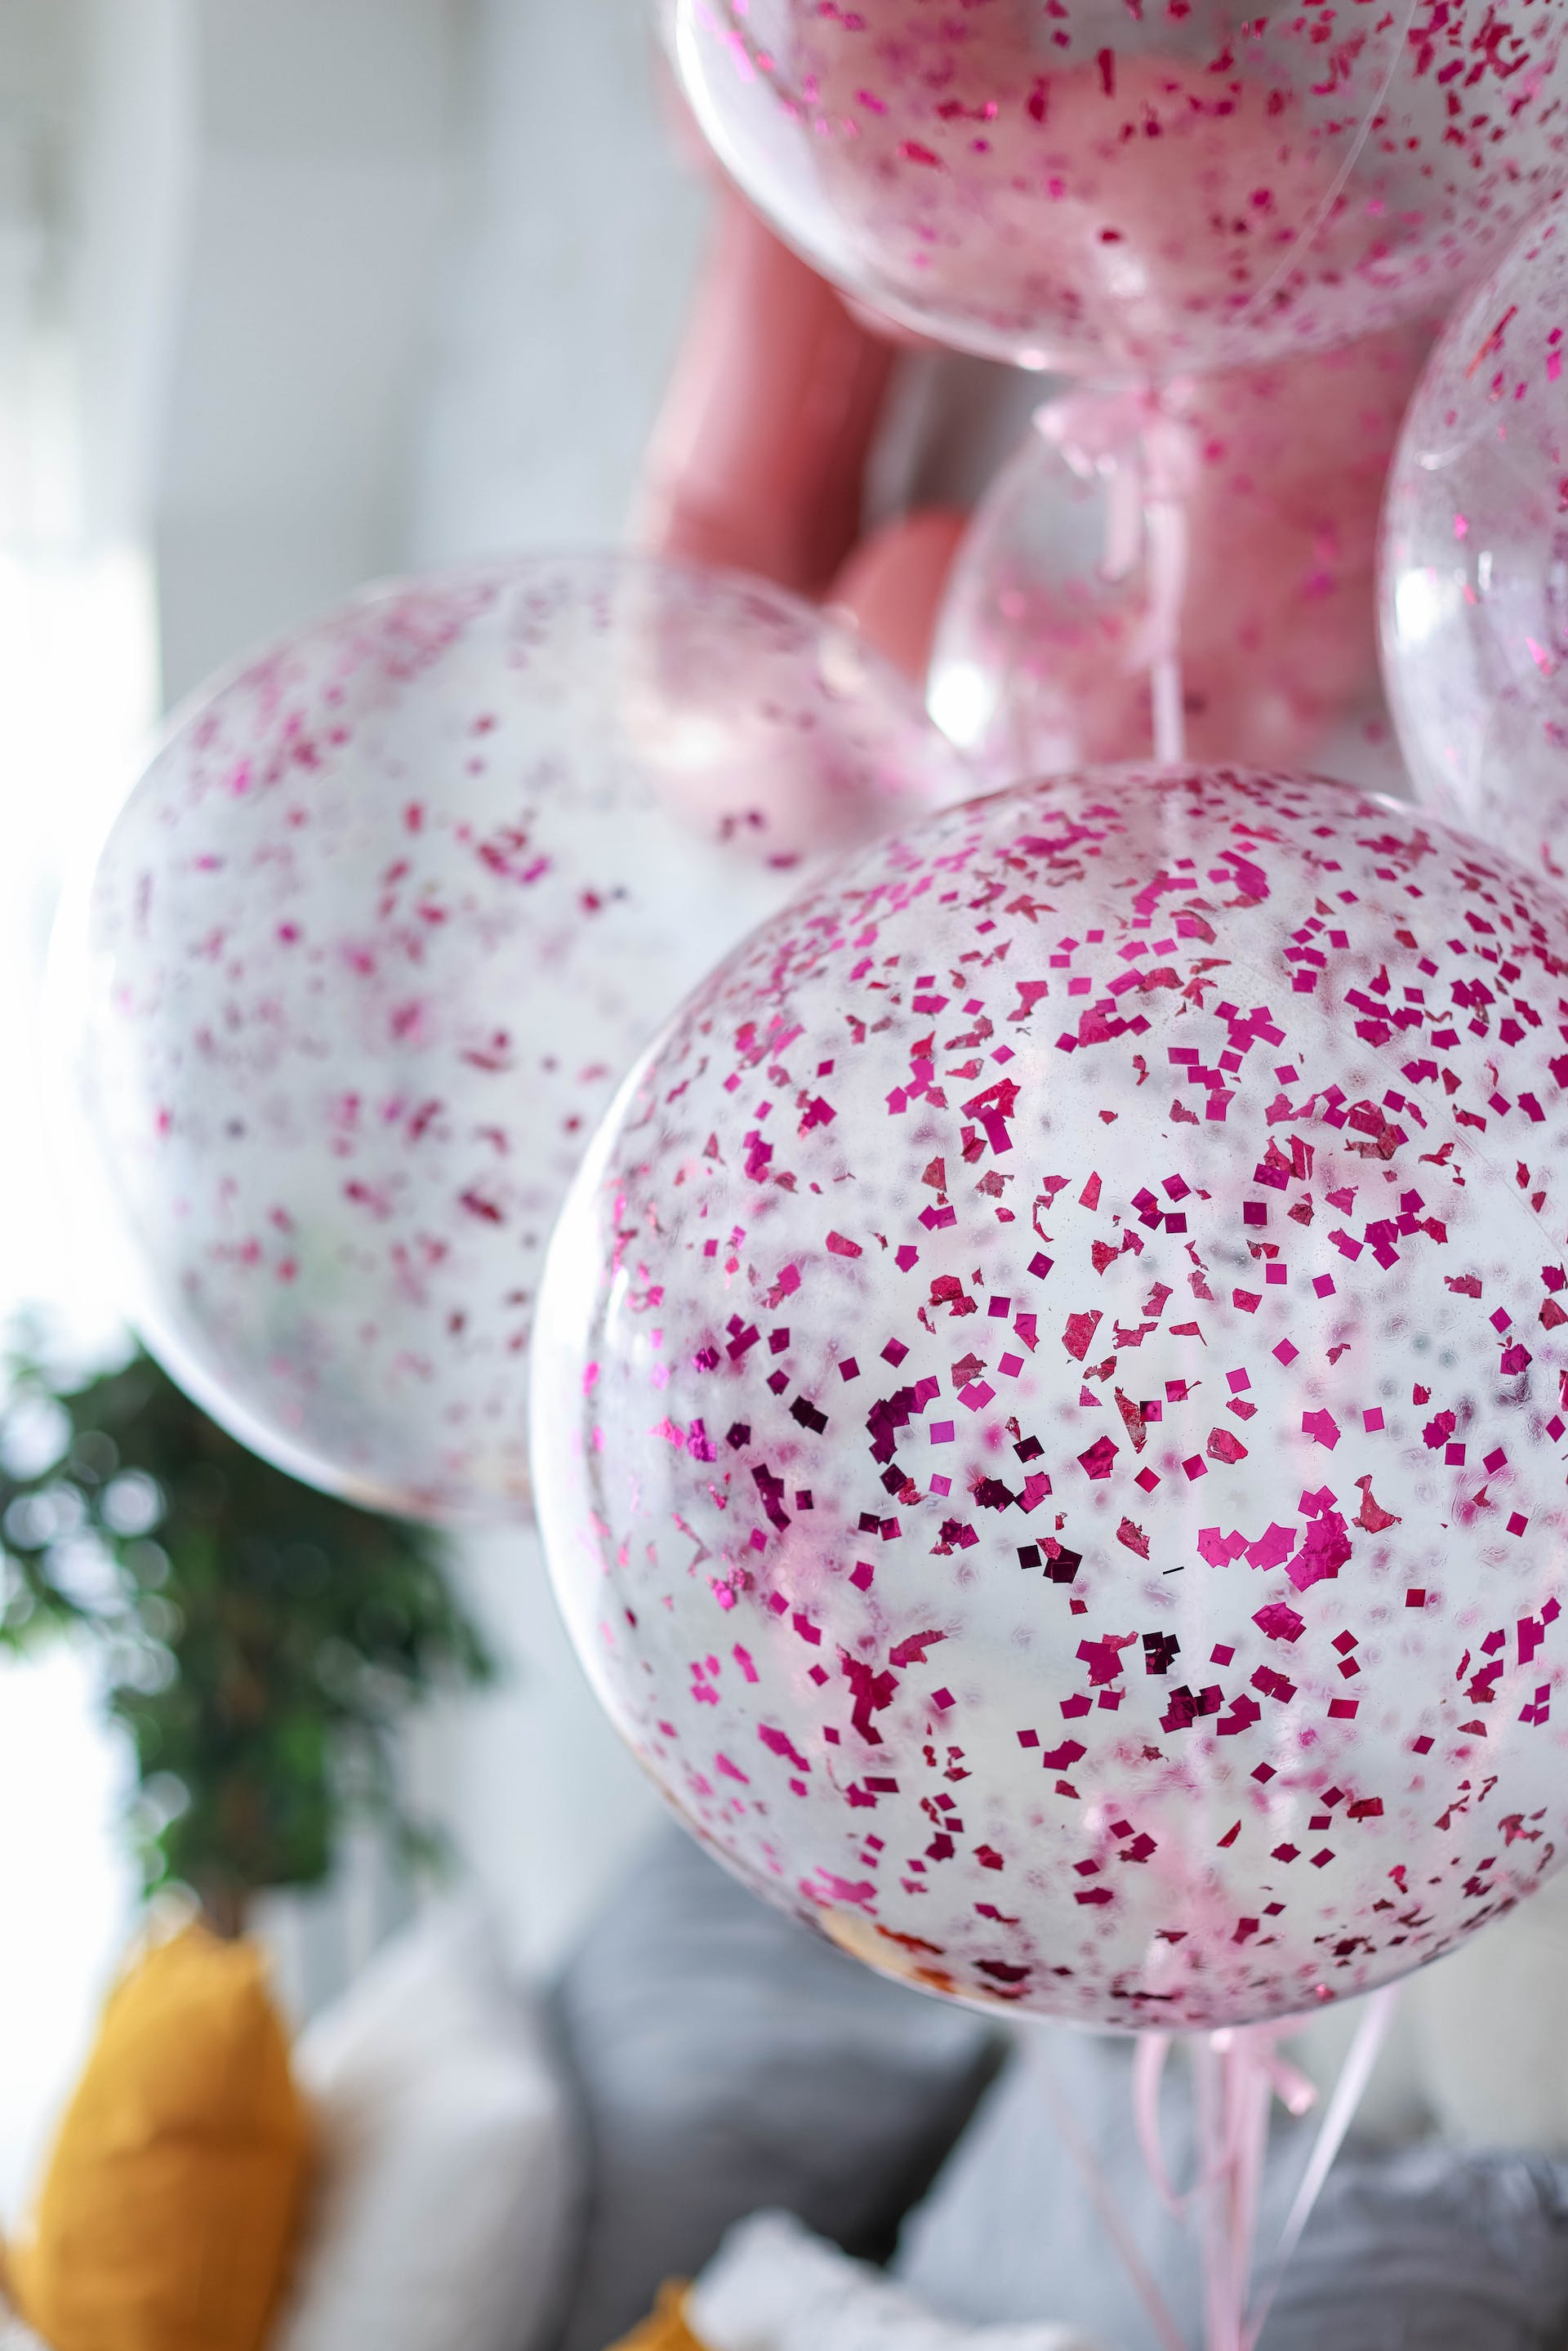 Balloons with pink confetti. | Source: Pexels